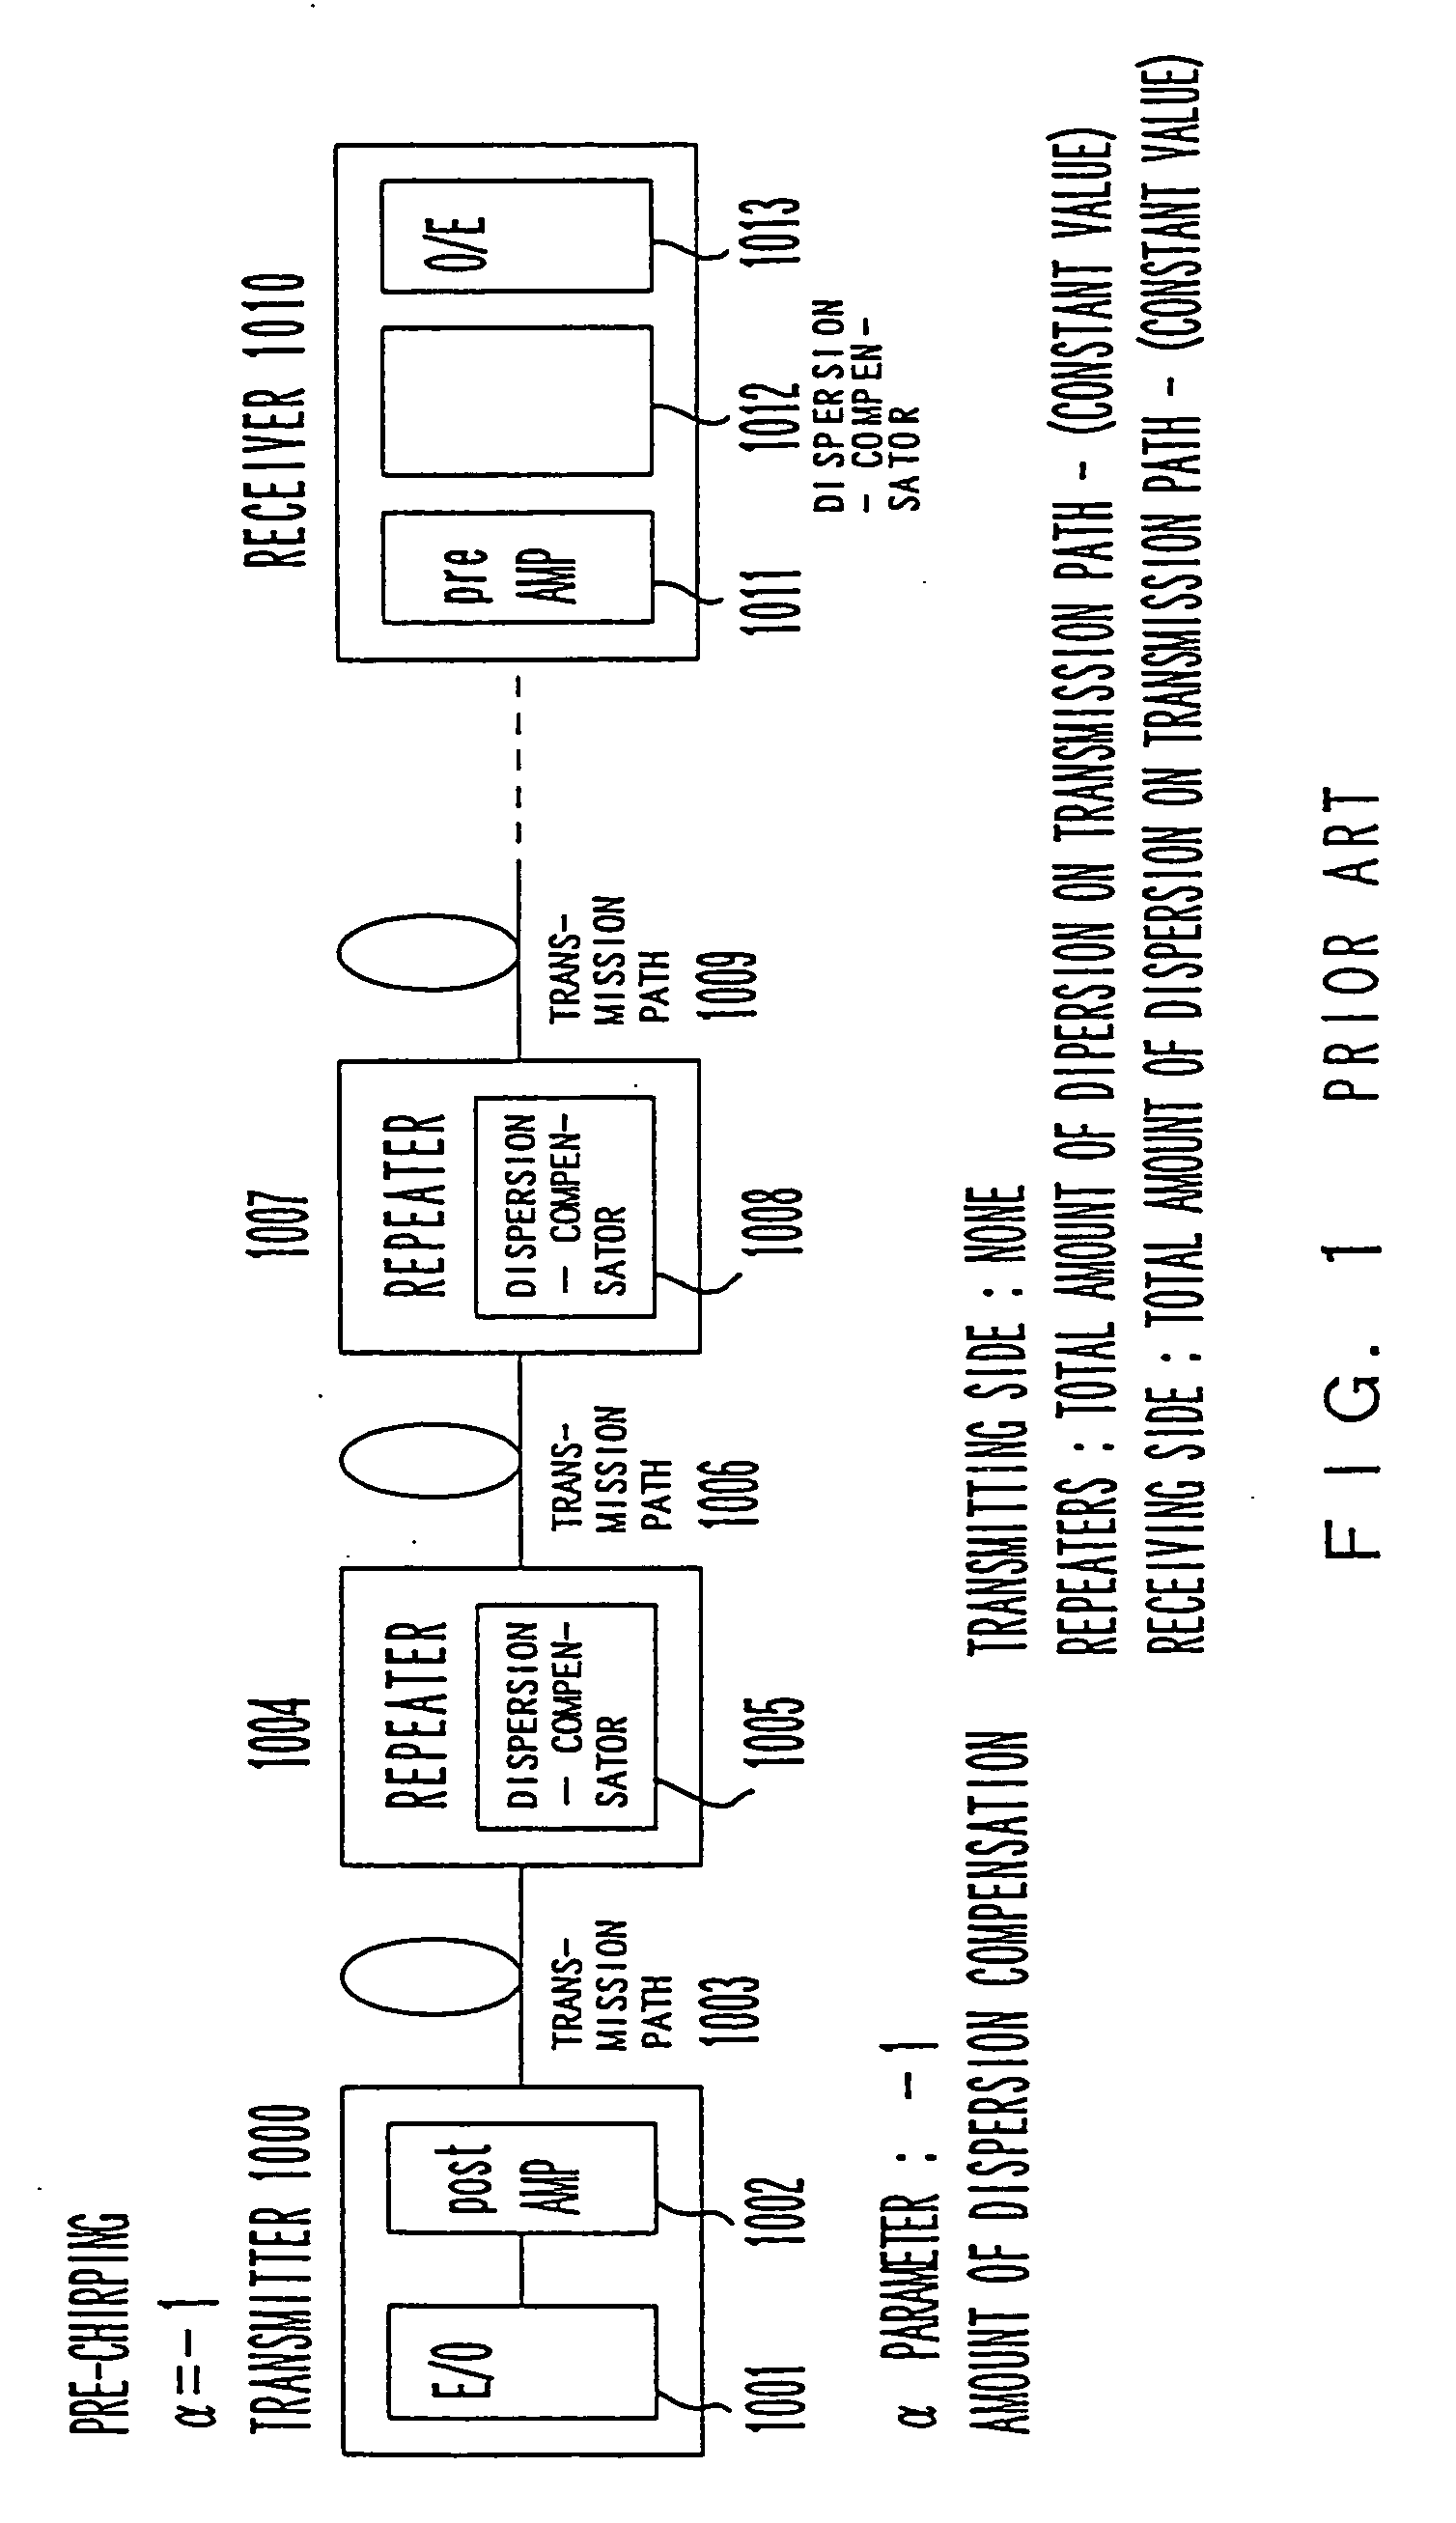 Optical transmission system using in-line amplifiers